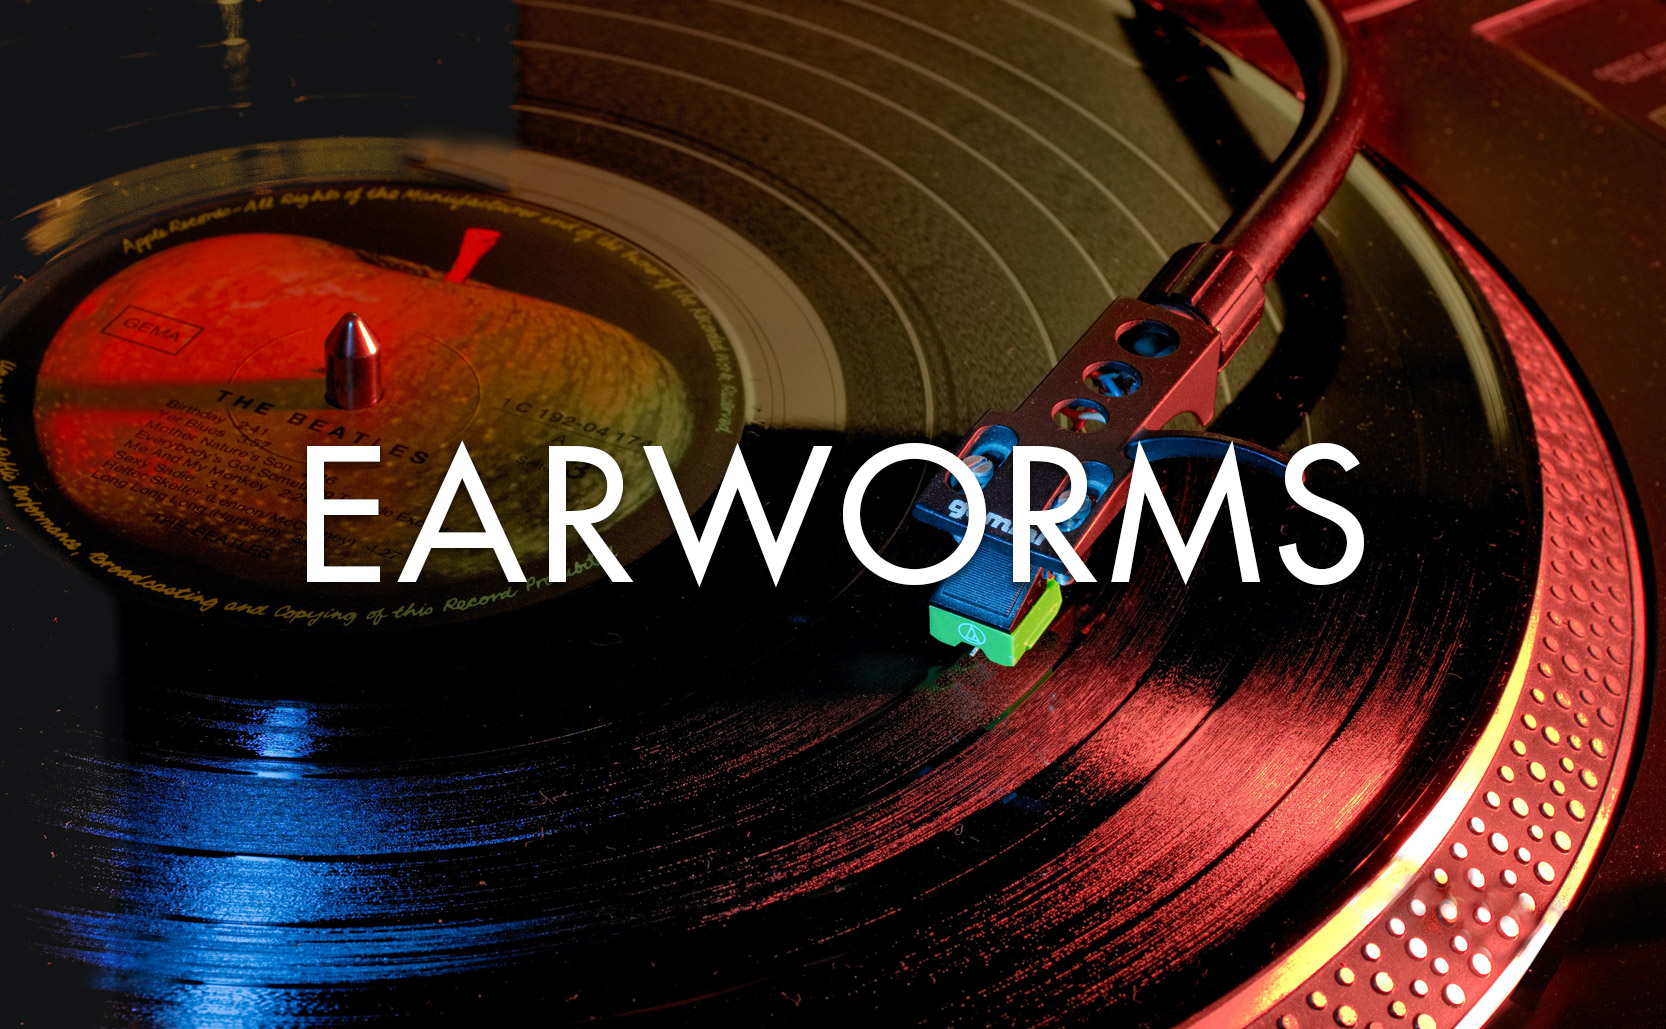 You are currently viewing Earworms